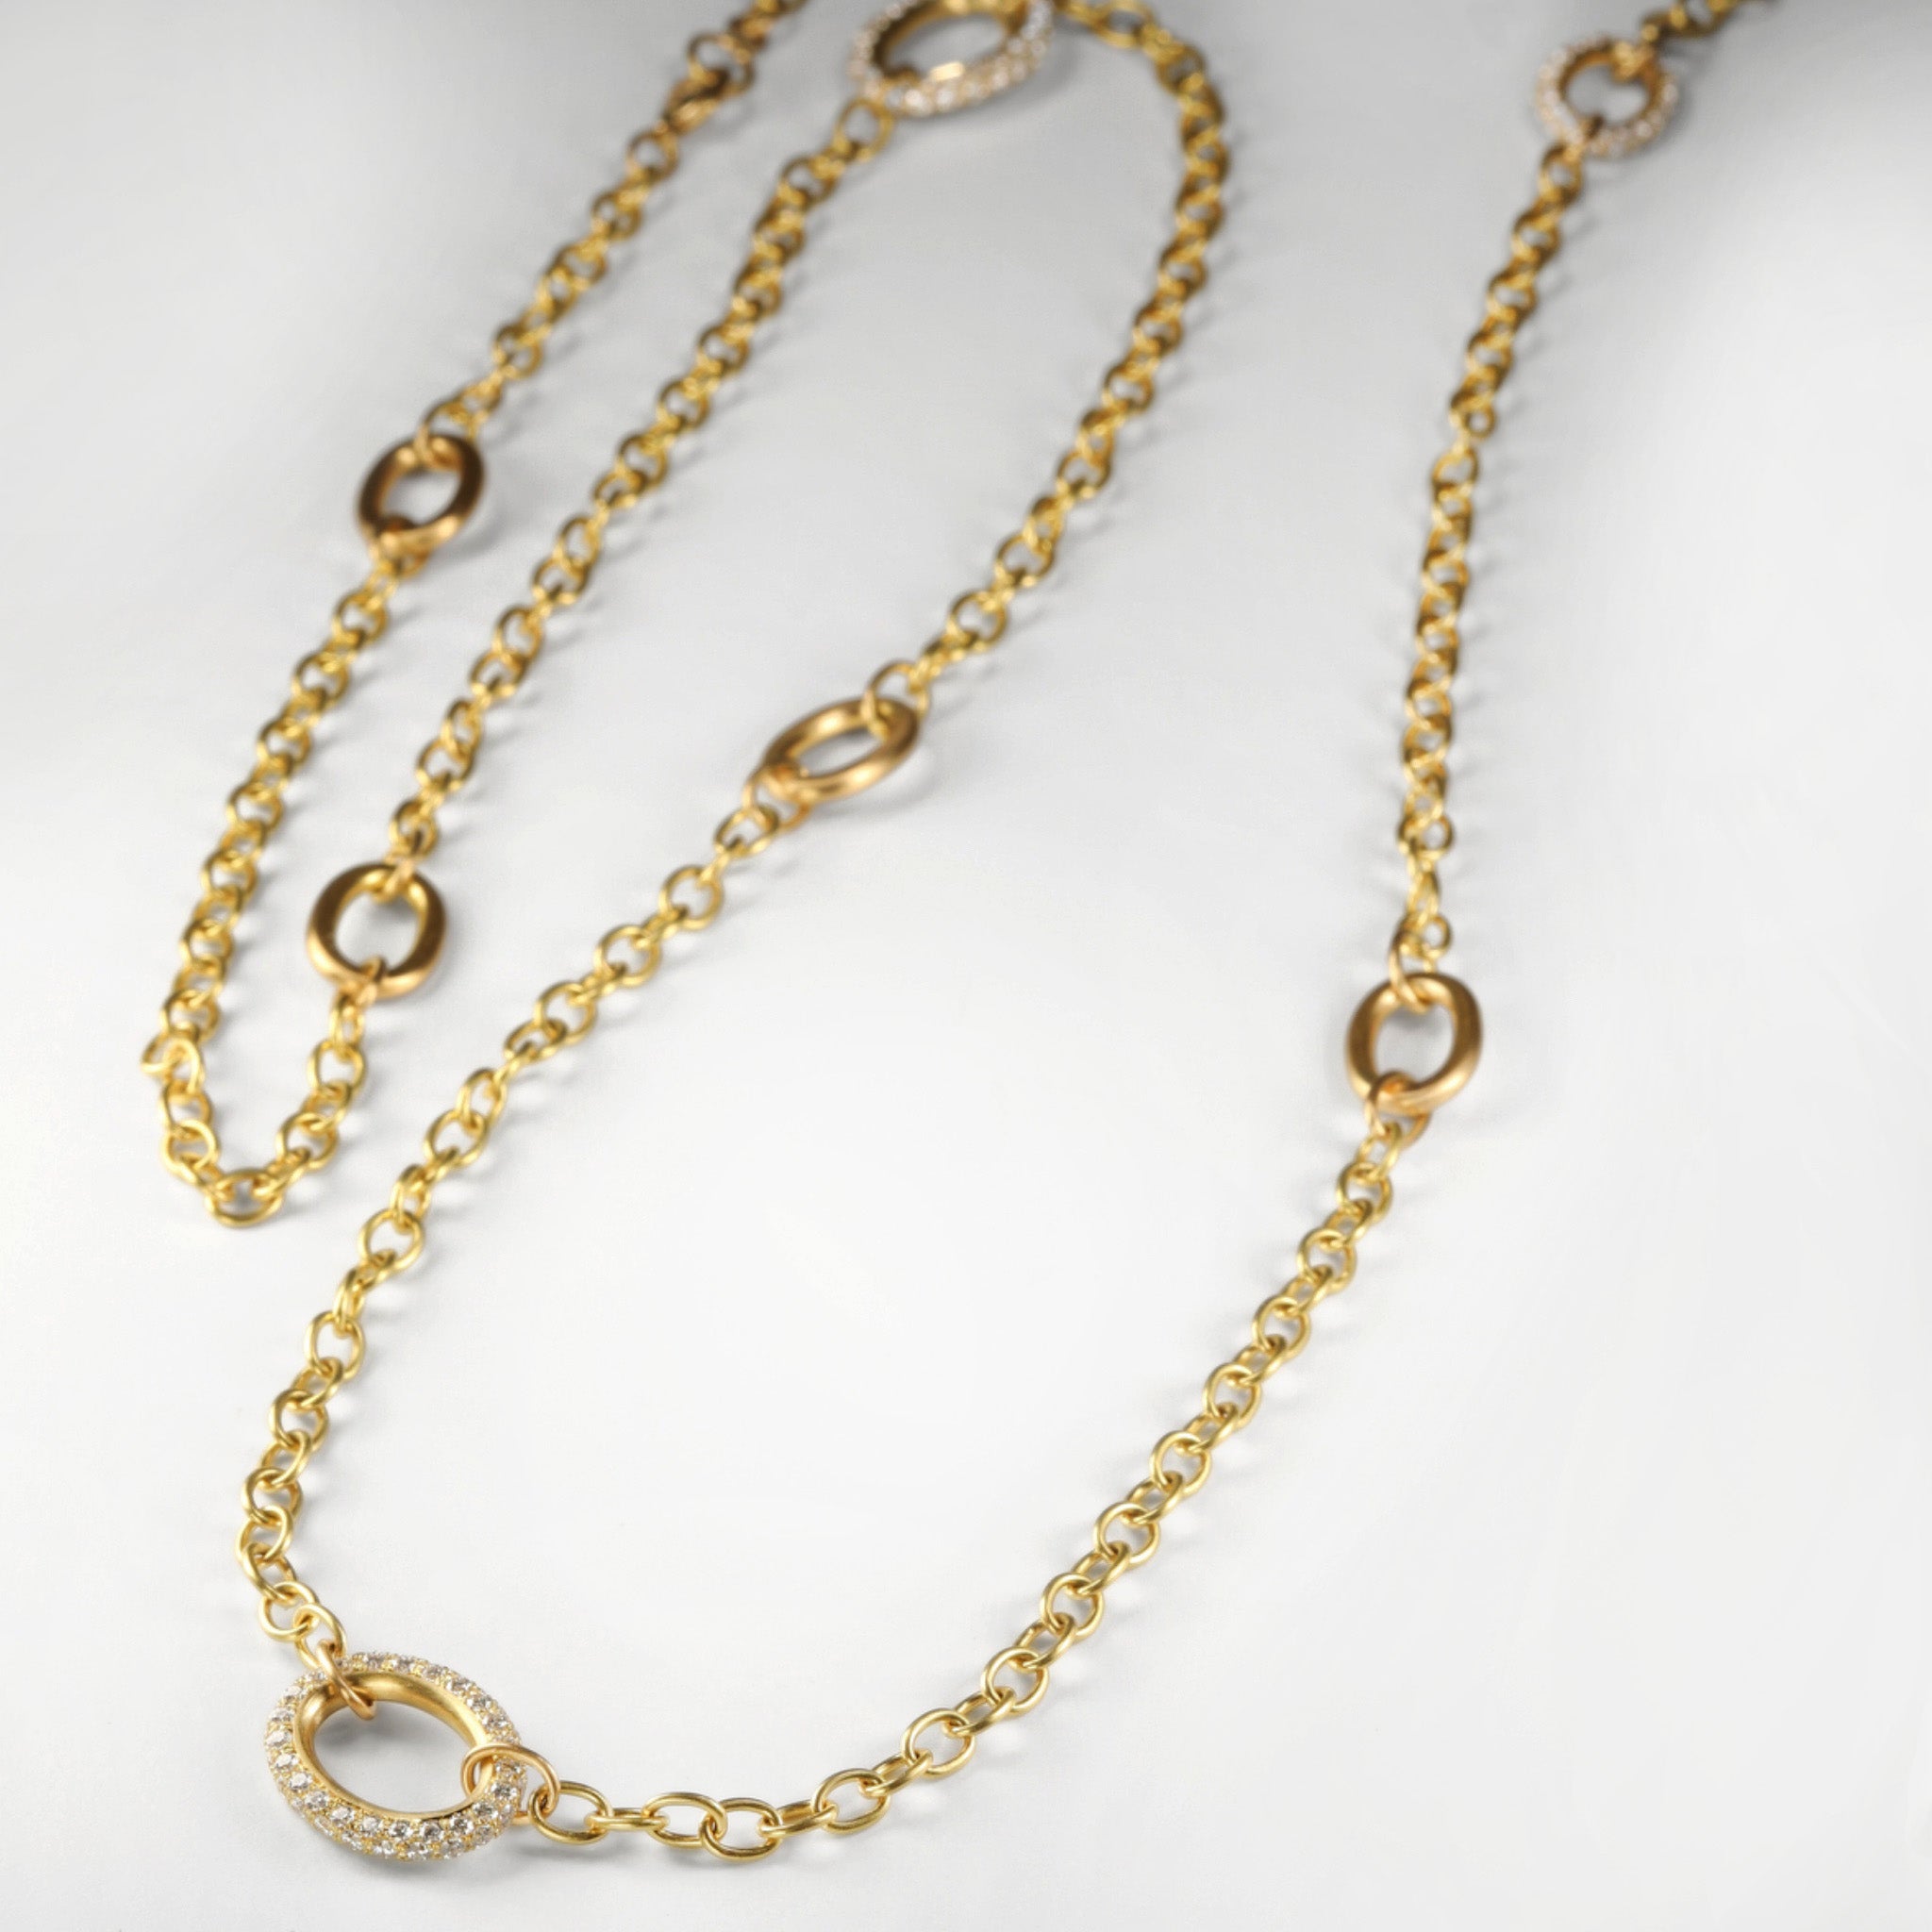 Caroline Ellen 20K Gold Handmade Chain Station Necklace with 8 Varied Gold and Pave Diamond Links